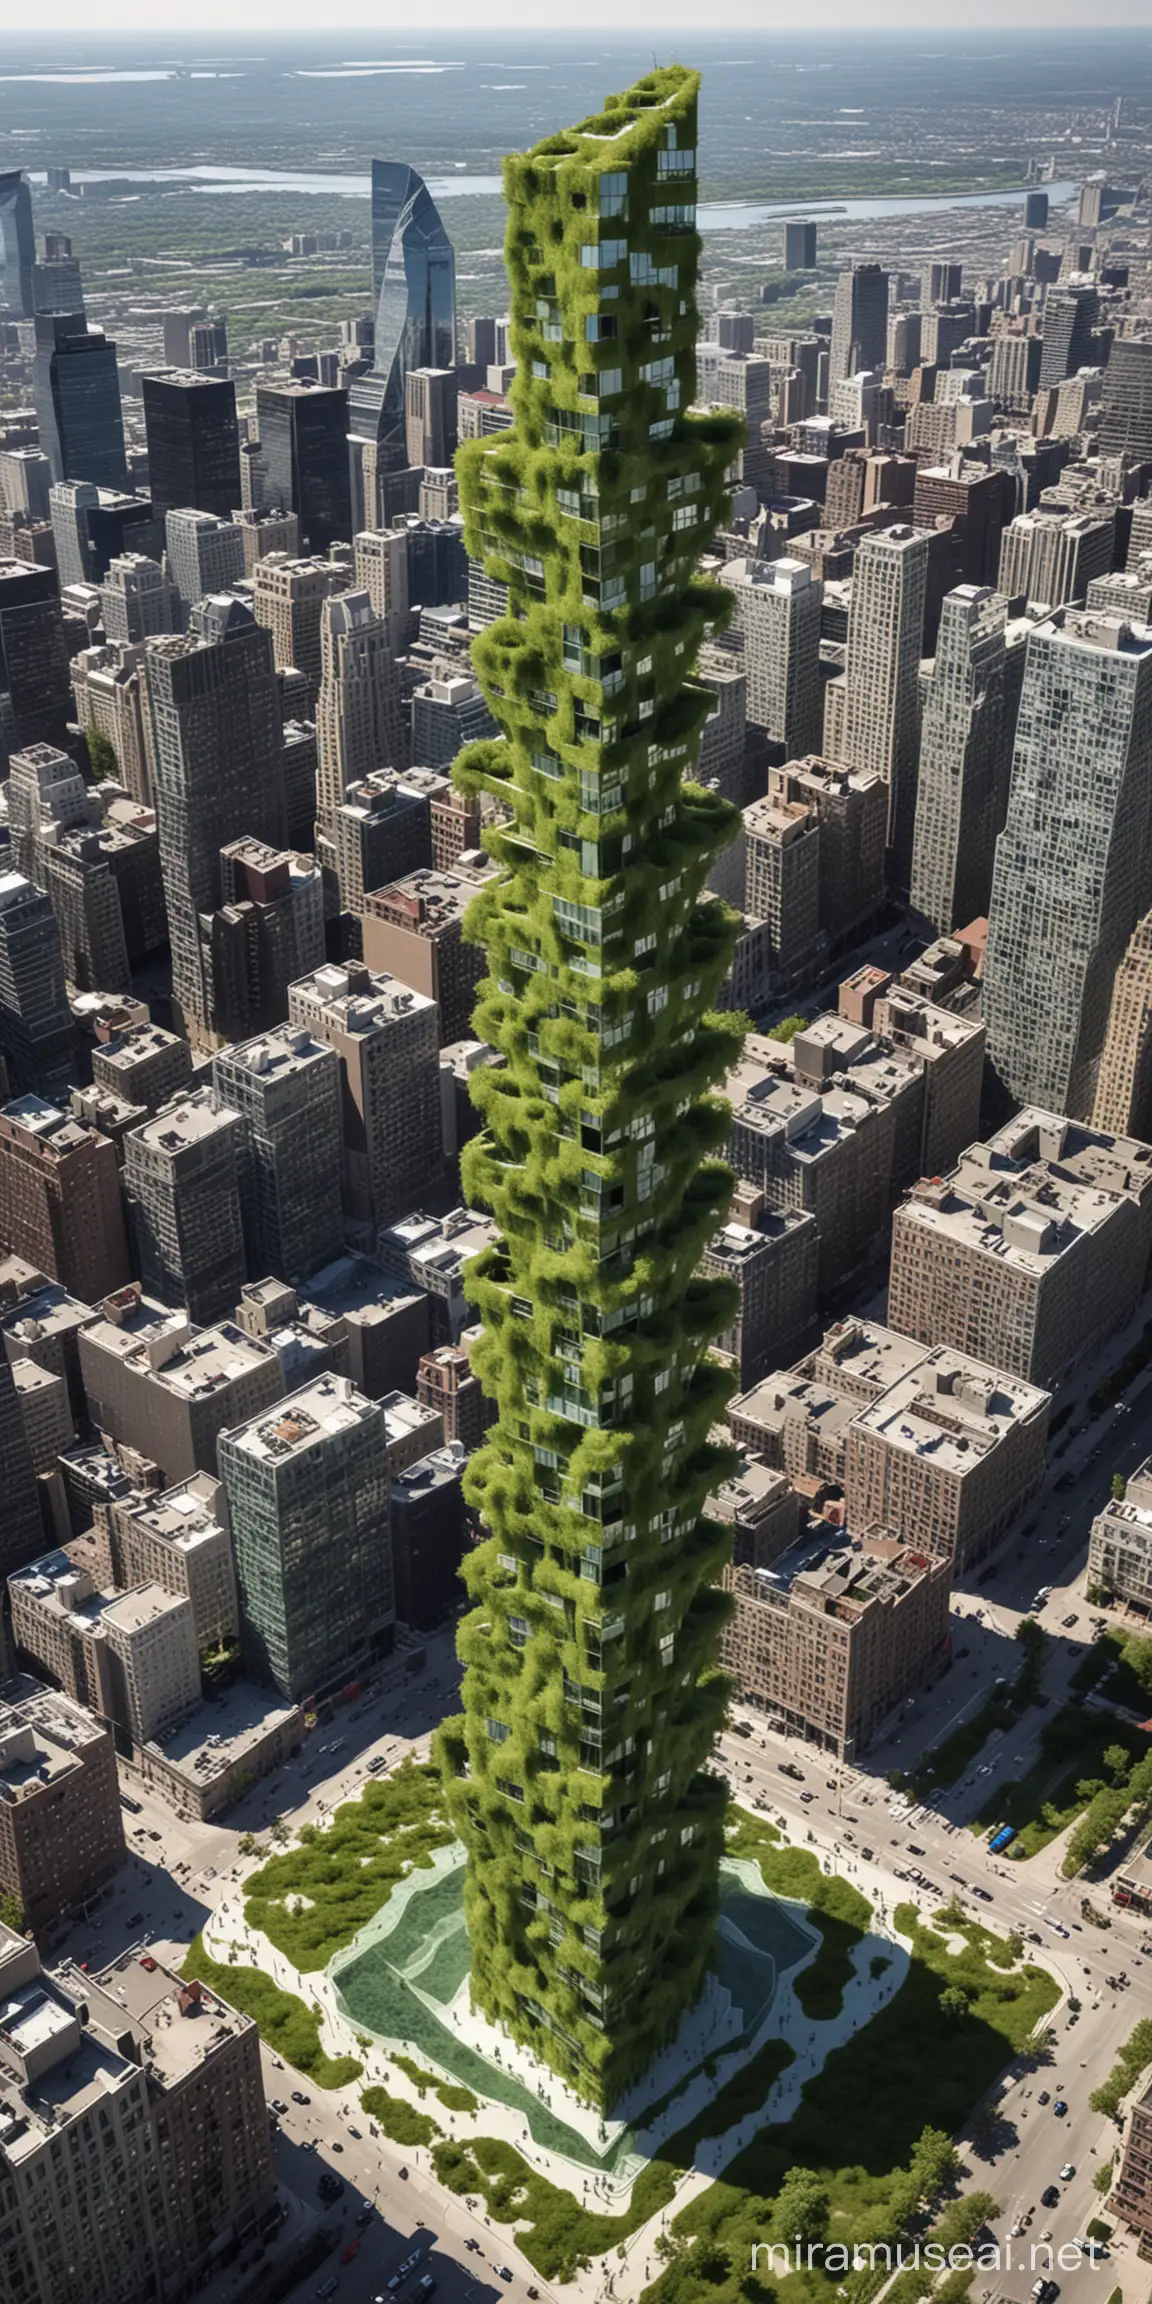 EcoFriendly Montreal Skyscraper with Tree Design and Sustainable Features